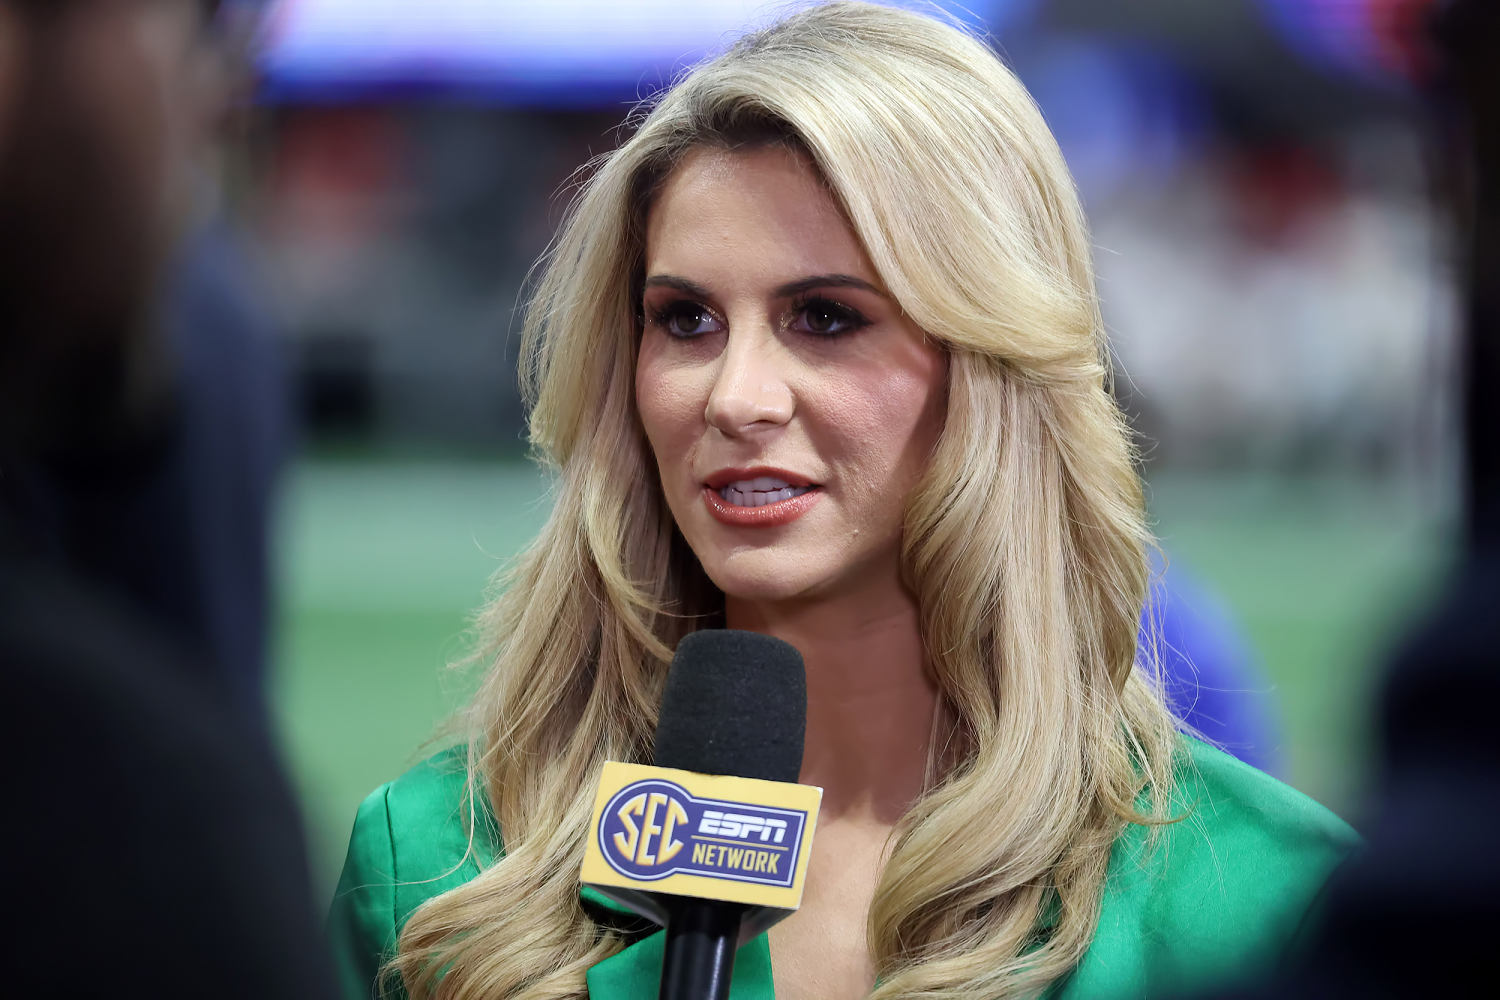 ESPN host Laura Rutledge shares update on 7-month-old son airlifted to hospital on Christmas